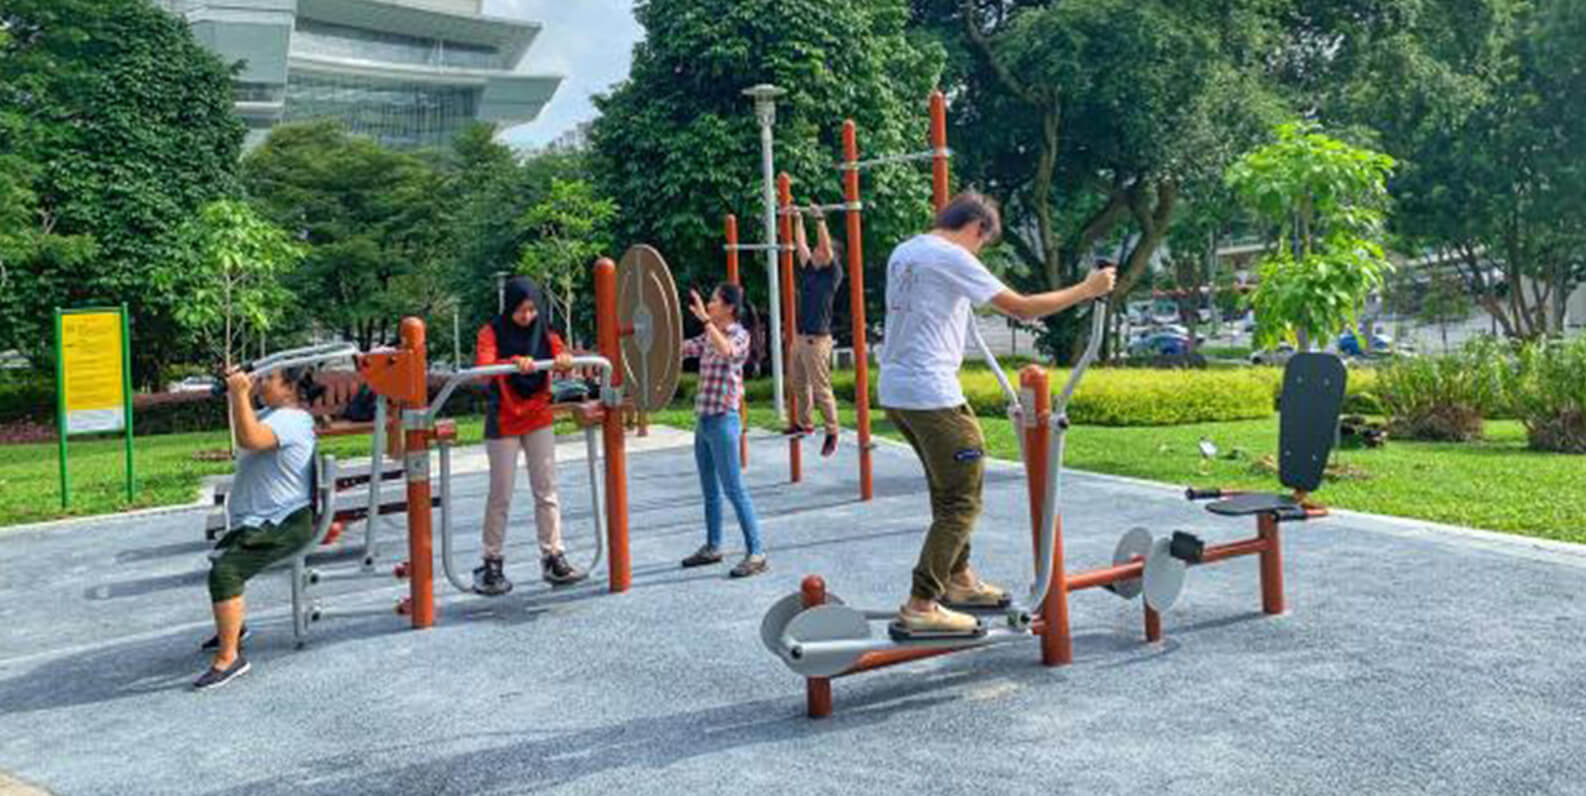 A group of people exercising using outdoor fitness equipment